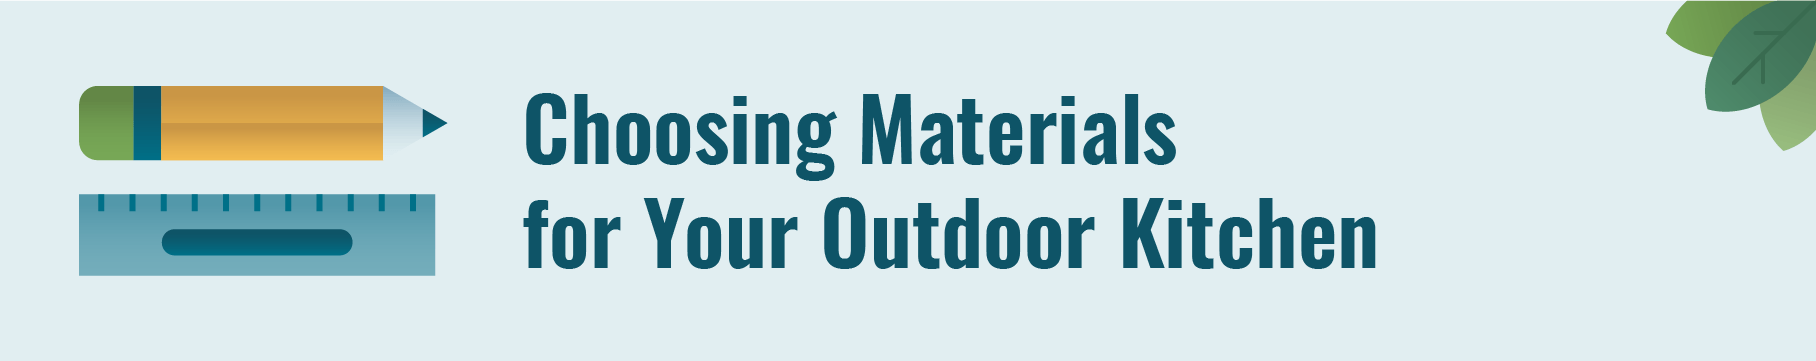 Choosing materials for your outdoor kitchen